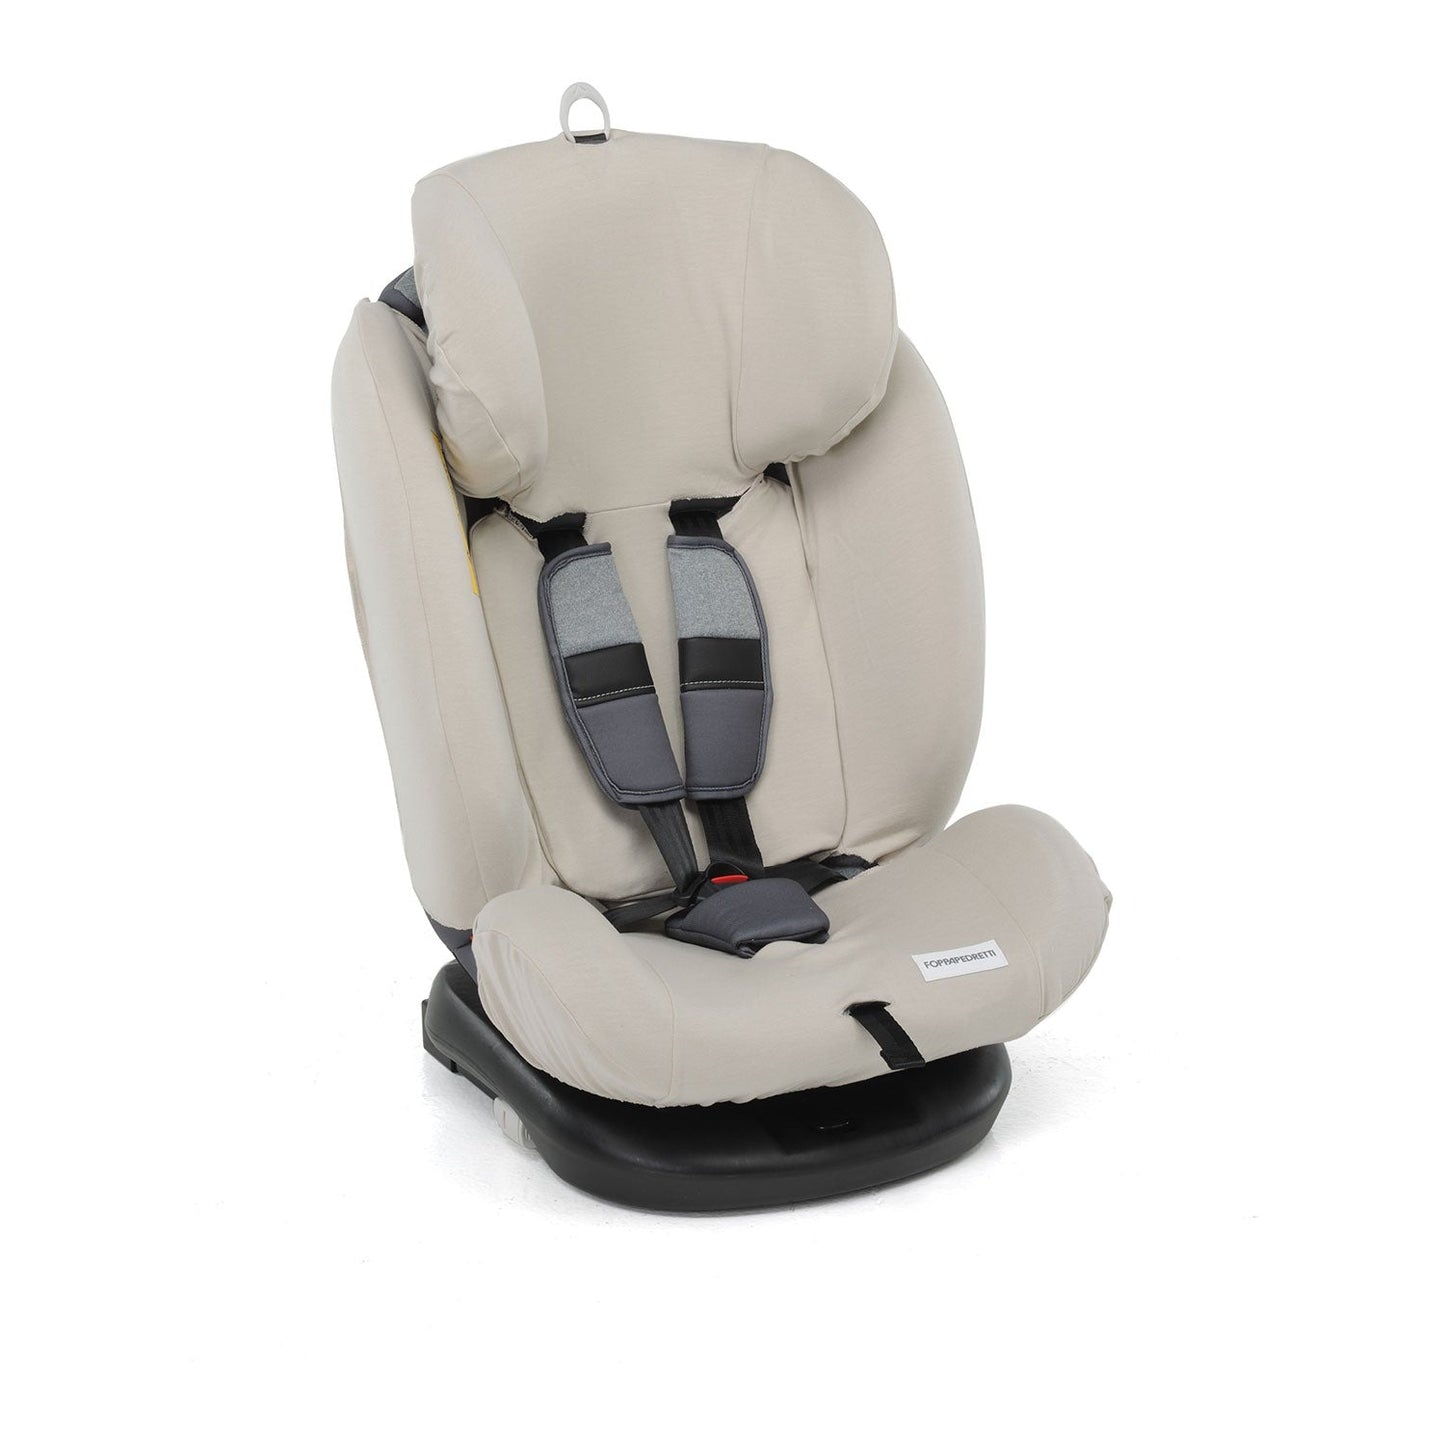 Foppapedretti - Summer Cover for Iturn duoFIX car seat